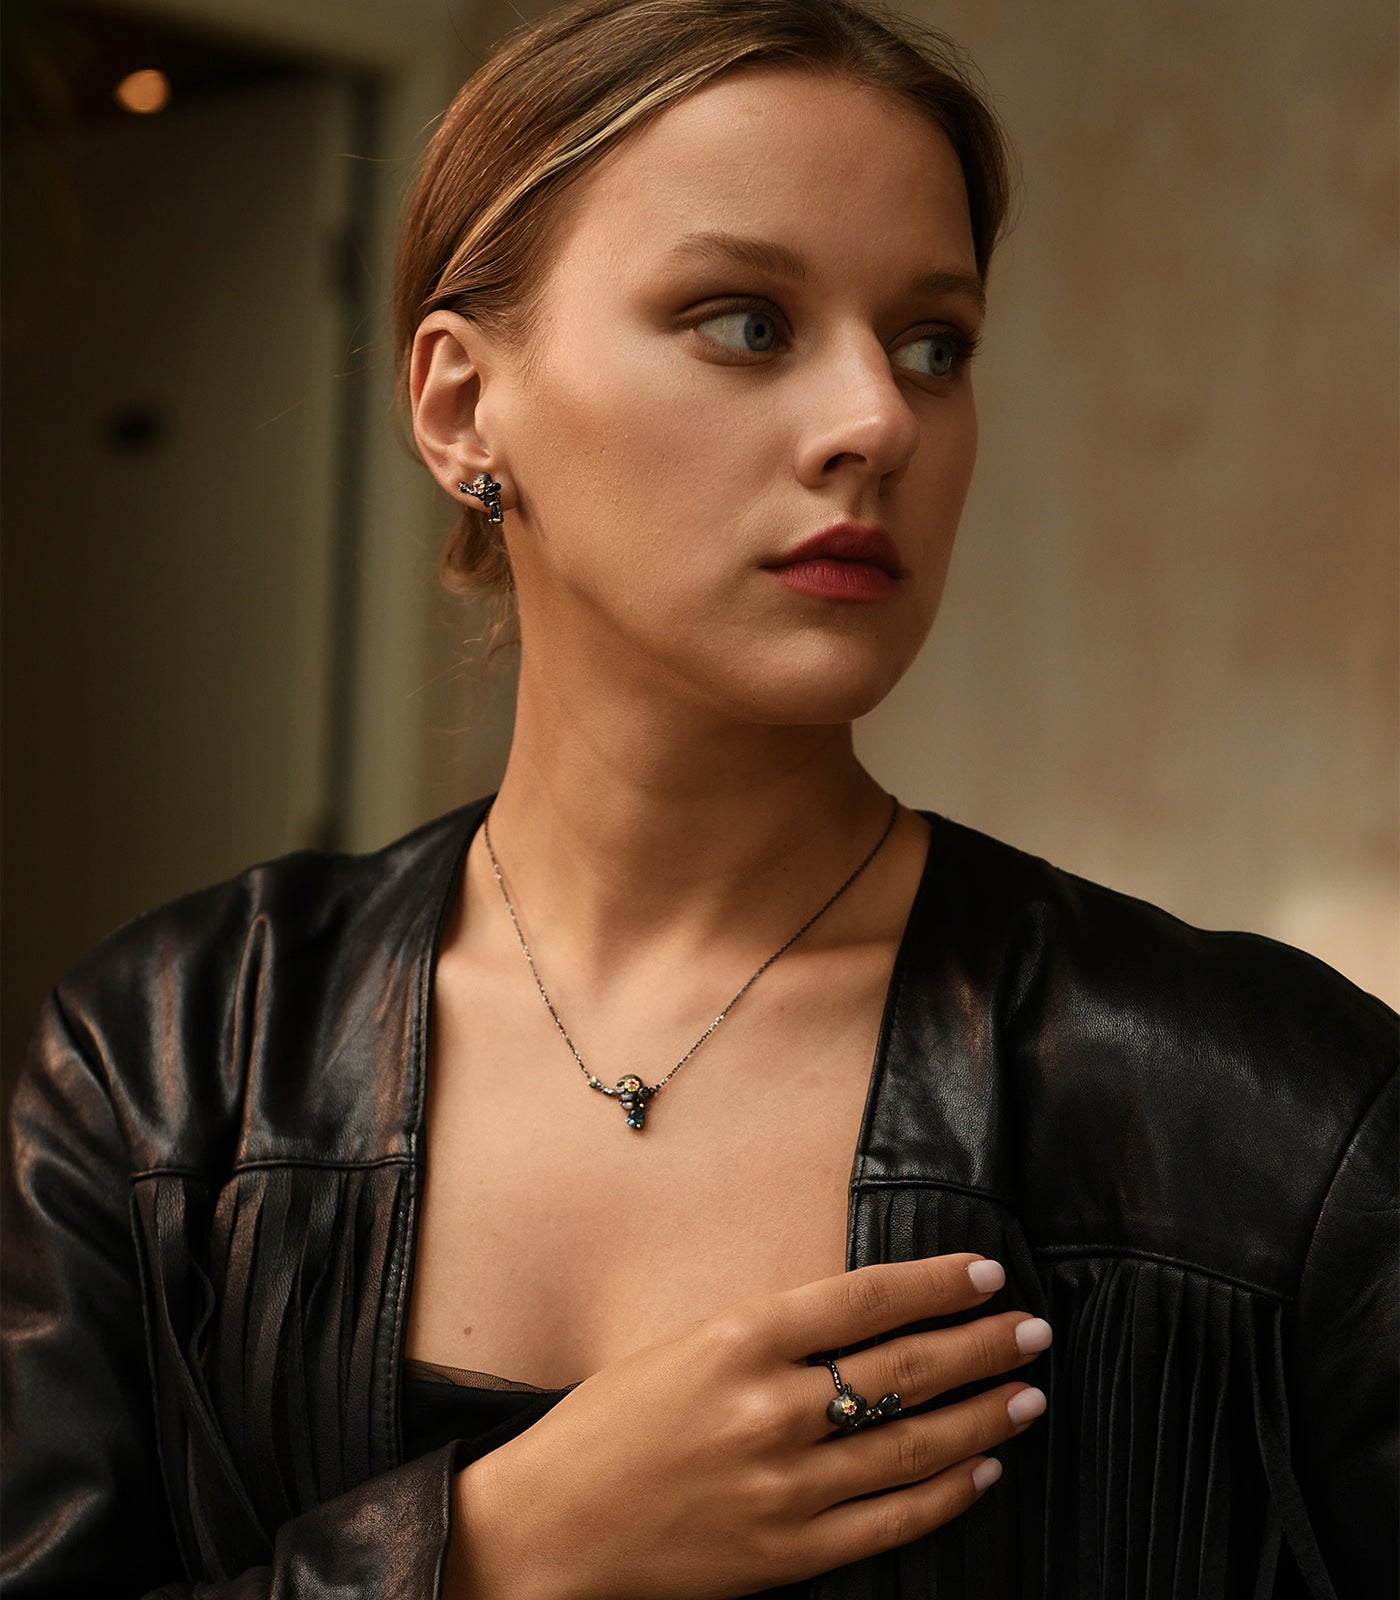 A model wears the complete set of skull motif jewellery, the set includes a necklace, ring and earrings.